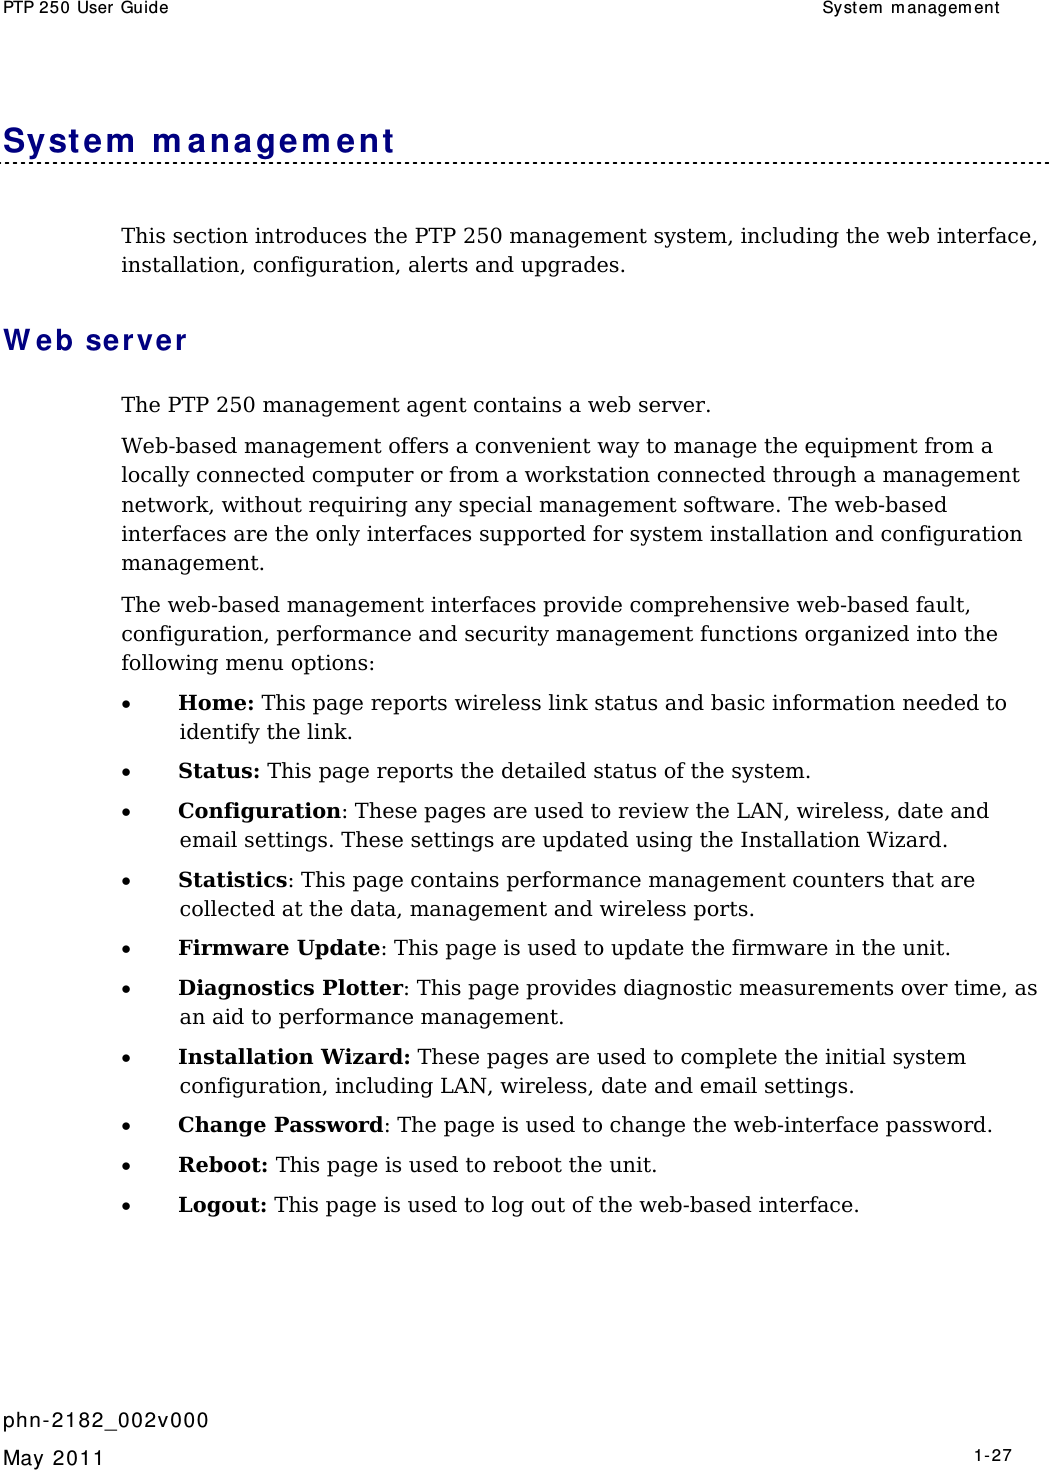 PTP 250 User Guide  Syst em  m anagem ent    phn- 2182_002v000   May 2011   1-27  System  m ana gem ent   This section introduces the PTP 250 management system, including the web interface, installation, configuration, alerts and upgrades. W eb ser ver The PTP 250 management agent contains a web server. Web-based management offers a convenient way to manage the equipment from a locally connected computer or from a workstation connected through a management network, without requiring any special management software. The web-based interfaces are the only interfaces supported for system installation and configuration management. The web-based management interfaces provide comprehensive web-based fault, configuration, performance and security management functions organized into the following menu options: • Home: This page reports wireless link status and basic information needed to identify the link. • Status: This page reports the detailed status of the system. • Configuration: These pages are used to review the LAN, wireless, date and email settings. These settings are updated using the Installation Wizard. • Statistics: This page contains performance management counters that are collected at the data, management and wireless ports. • Firmware Update: This page is used to update the firmware in the unit. • Diagnostics Plotter: This page provides diagnostic measurements over time, as an aid to performance management. • Installation Wizard: These pages are used to complete the initial system  configuration, including LAN, wireless, date and email settings. • Change Password: The page is used to change the web-interface password. • Reboot: This page is used to reboot the unit. • Logout: This page is used to log out of the web-based interface. 